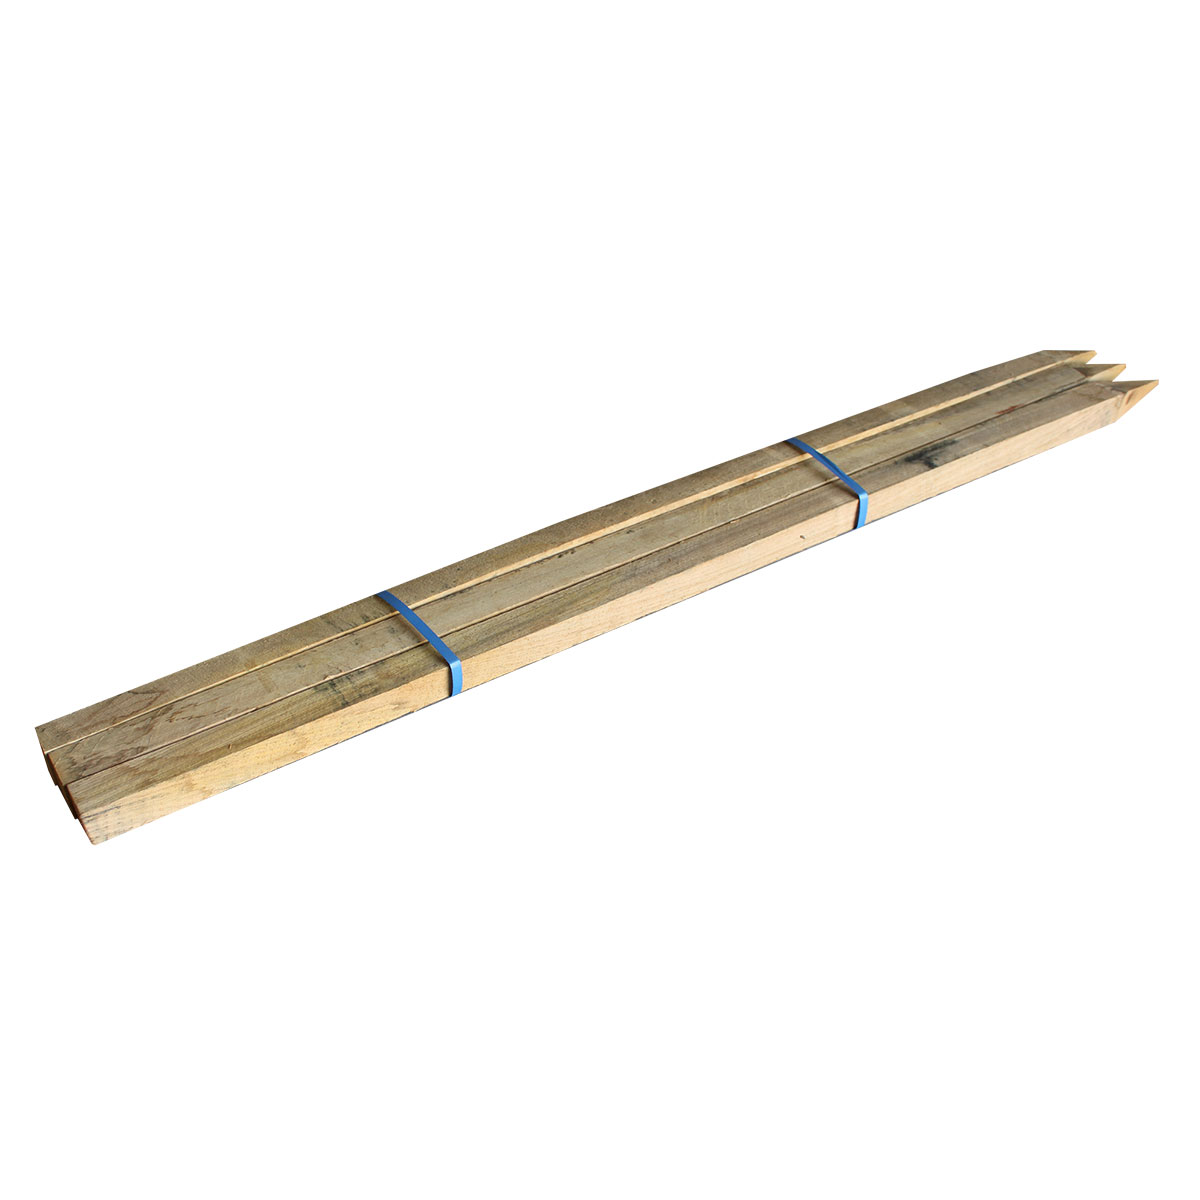 Hardwood Stakes 50 x 50 x 1200mm - 3 Pack